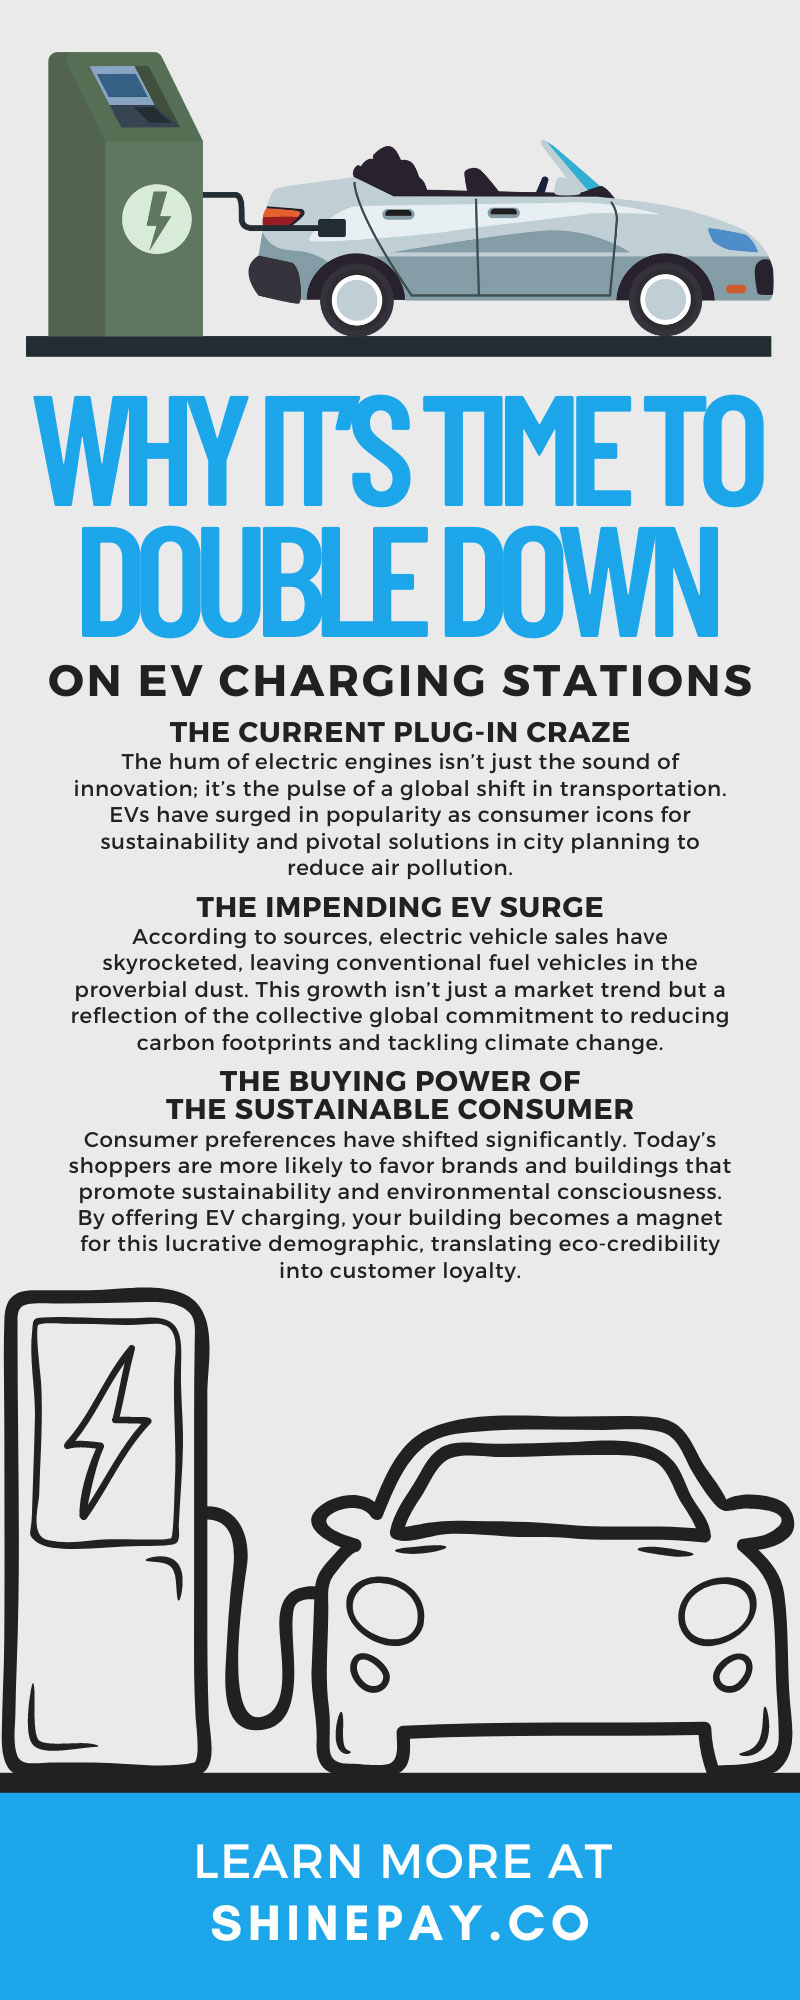 Why It’s Time To Double Down on EV Charging Stations